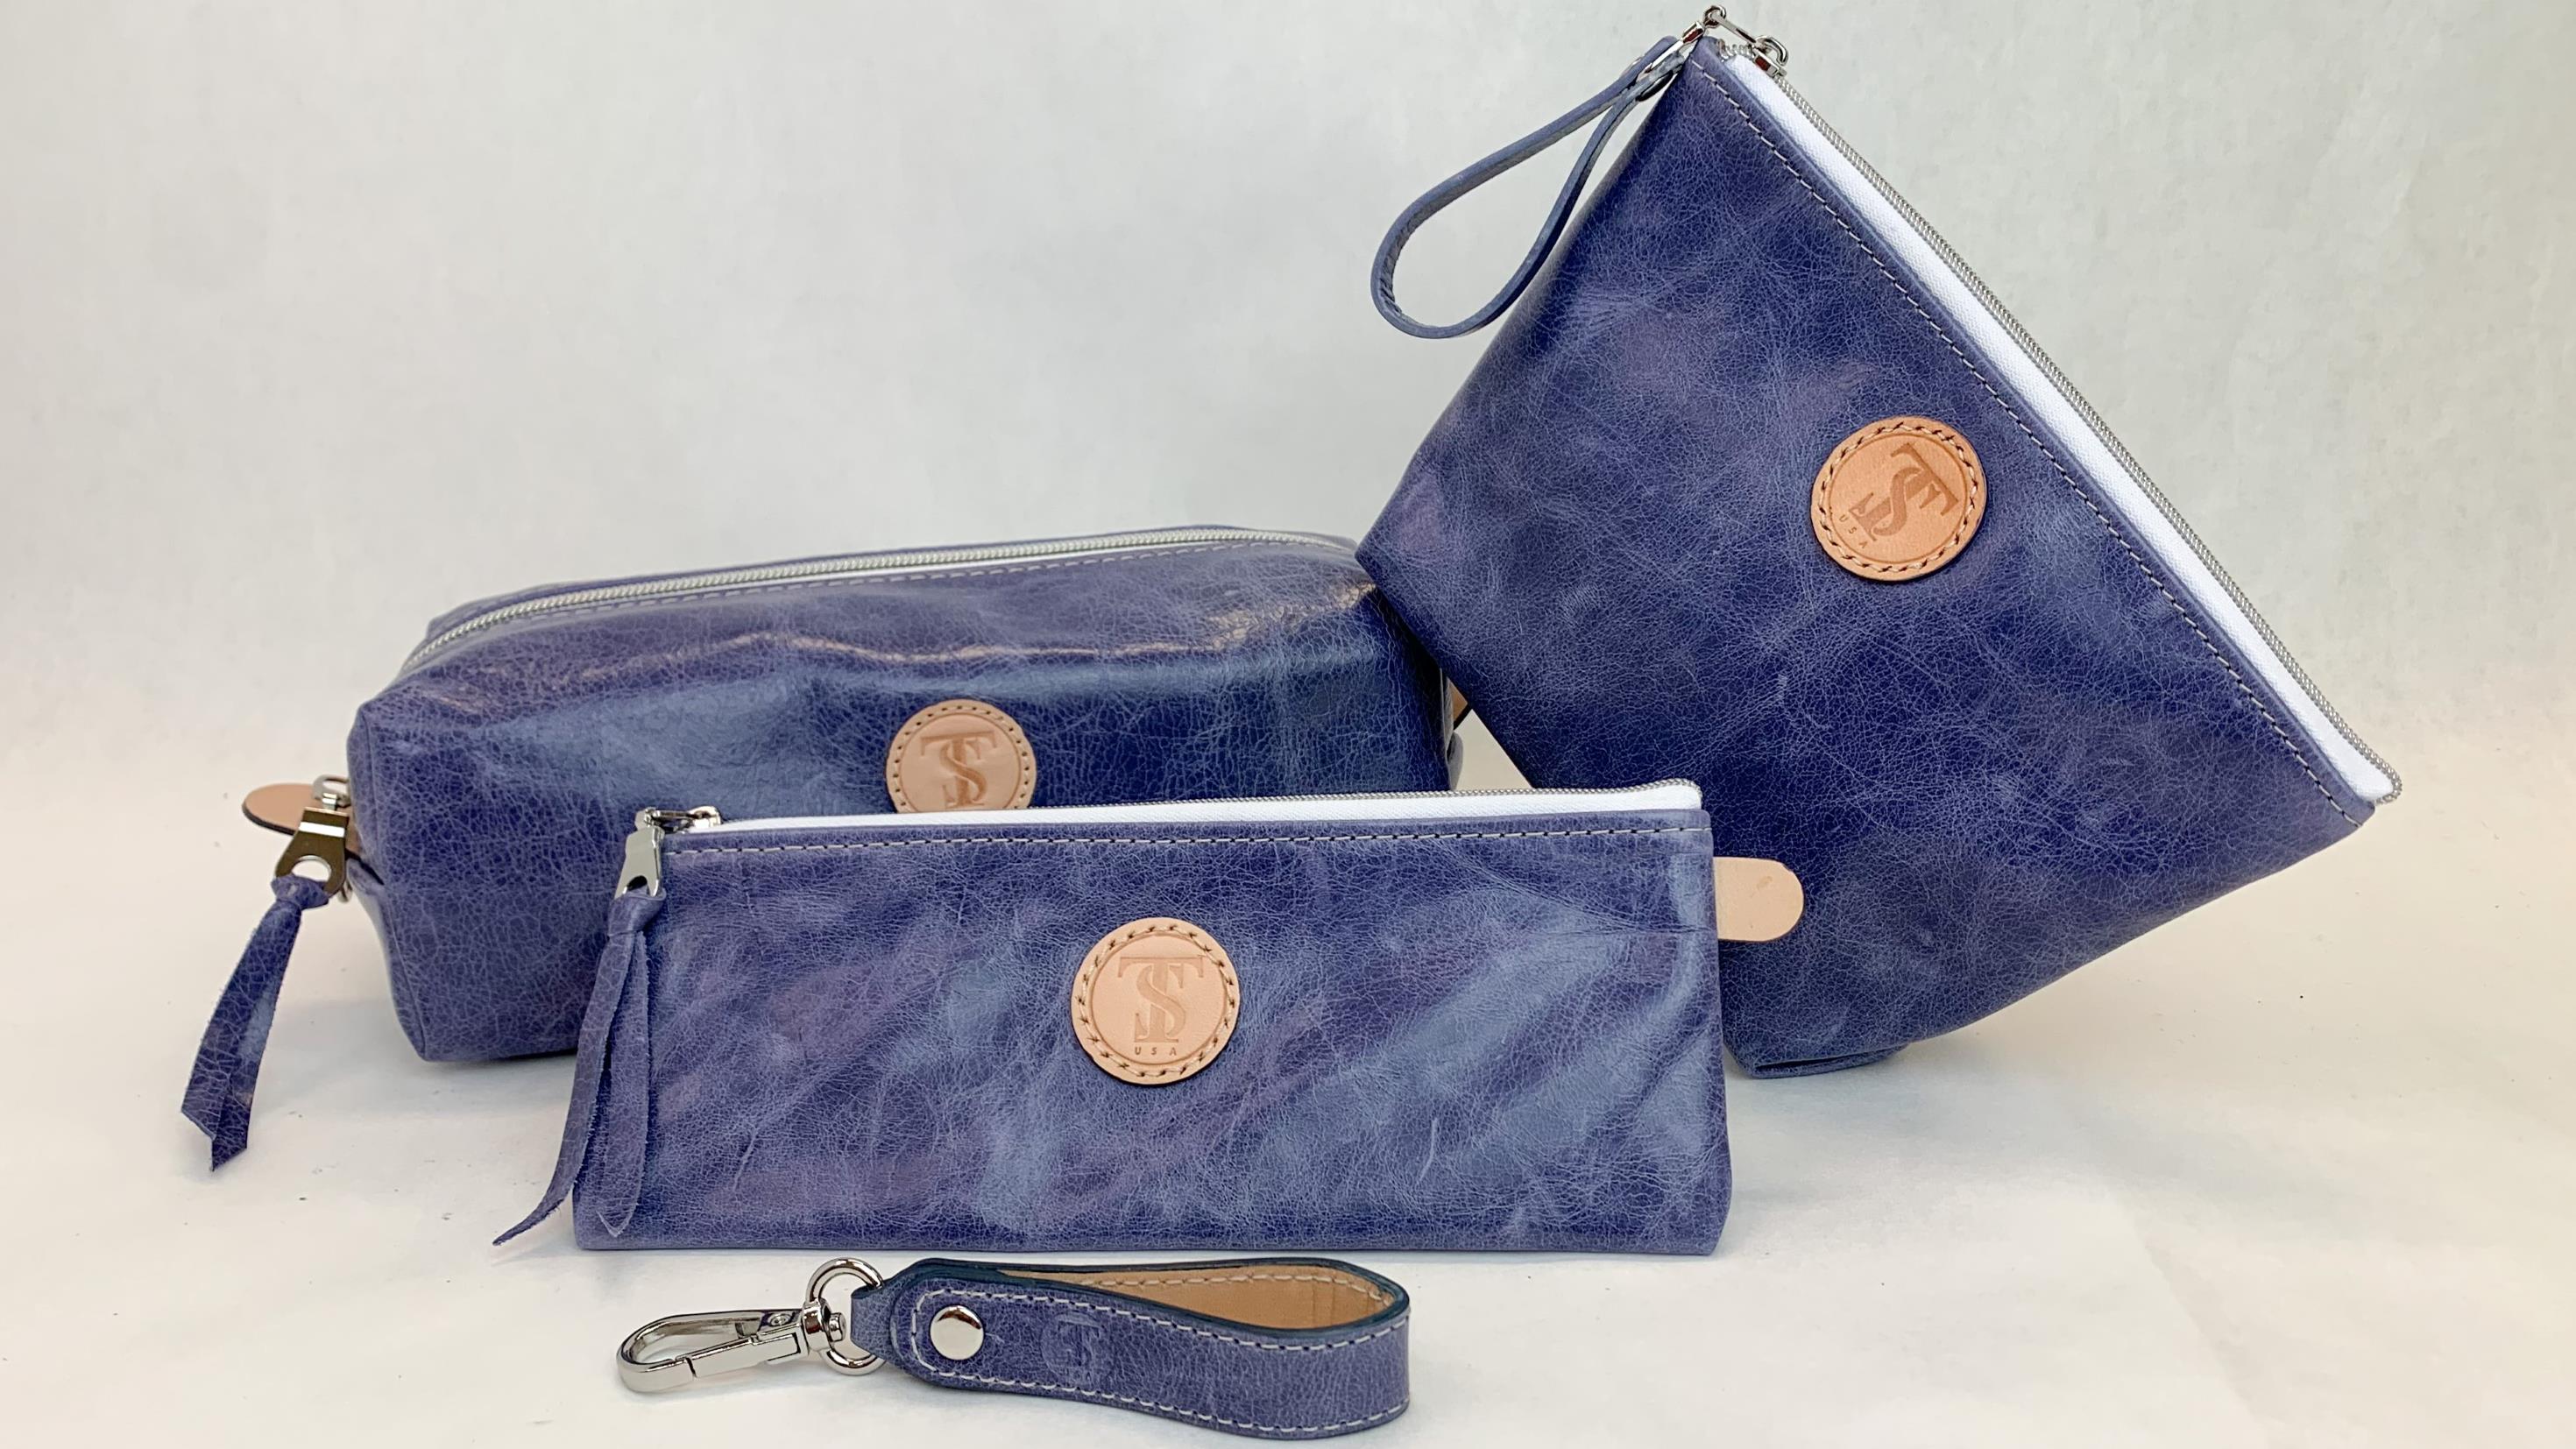 Town & Shore Handcrafted T5 Leather bath kit, cosmetics bag and travel cases in Atlantic denim blue calfskin leather. Perfect for organizing cosmetics, toiletries and supplies.